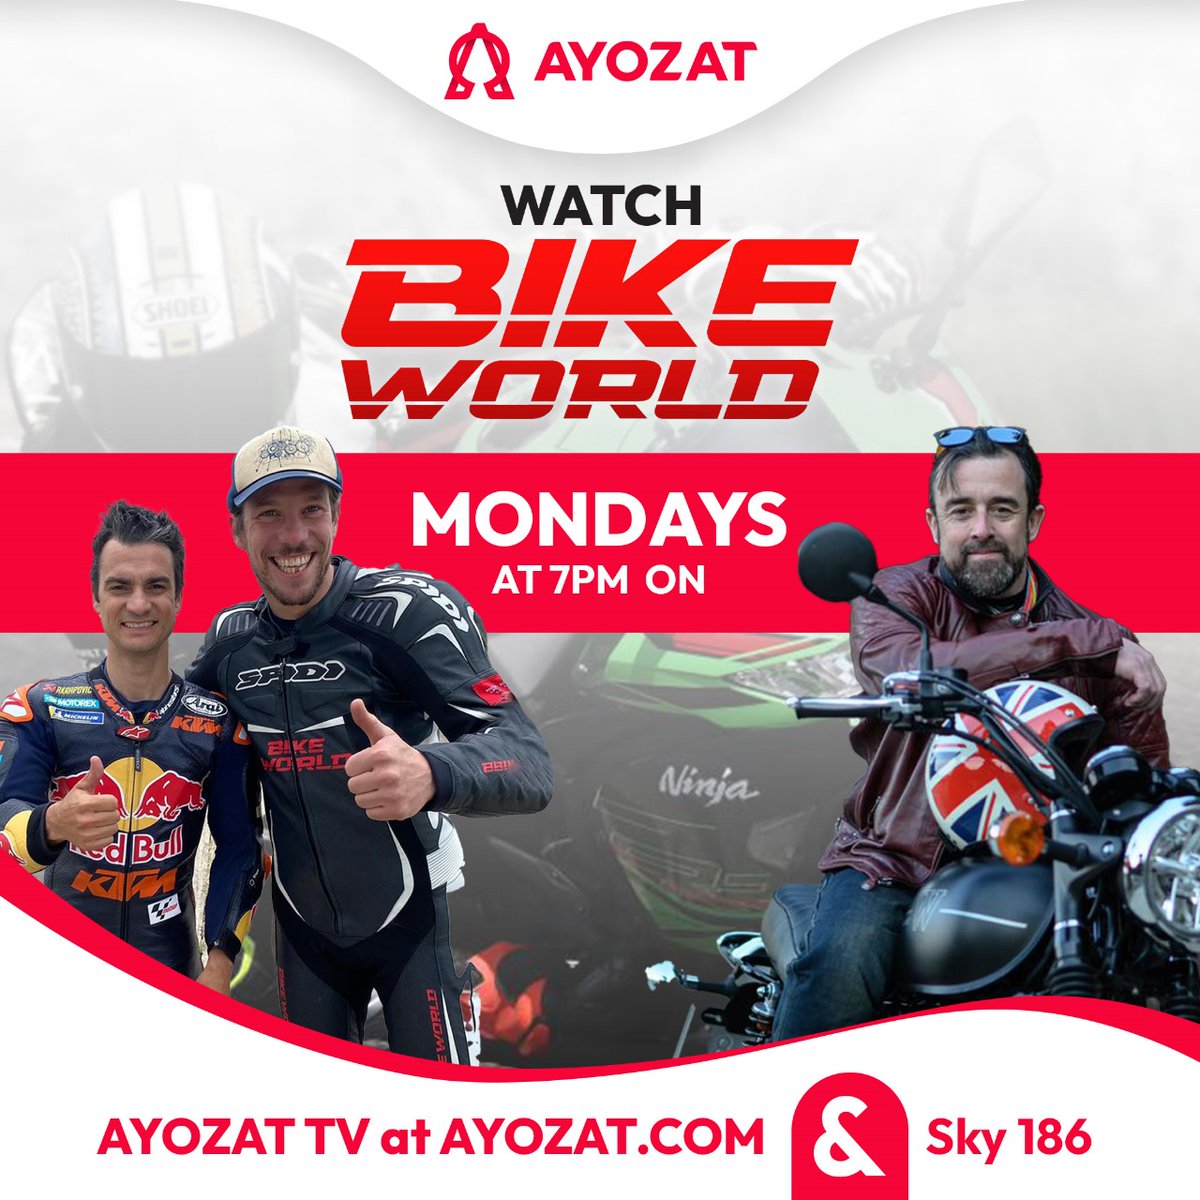 Gear up for action every Monday at 7pm! Join us for Bike World, your ticket to the thrilling world of motorcycles, on AYOZAT TV at Sky 186 and ayozat.com. #bikeworld #motorbikes #motorsport #motorbikelife @Bikeworldtvshow